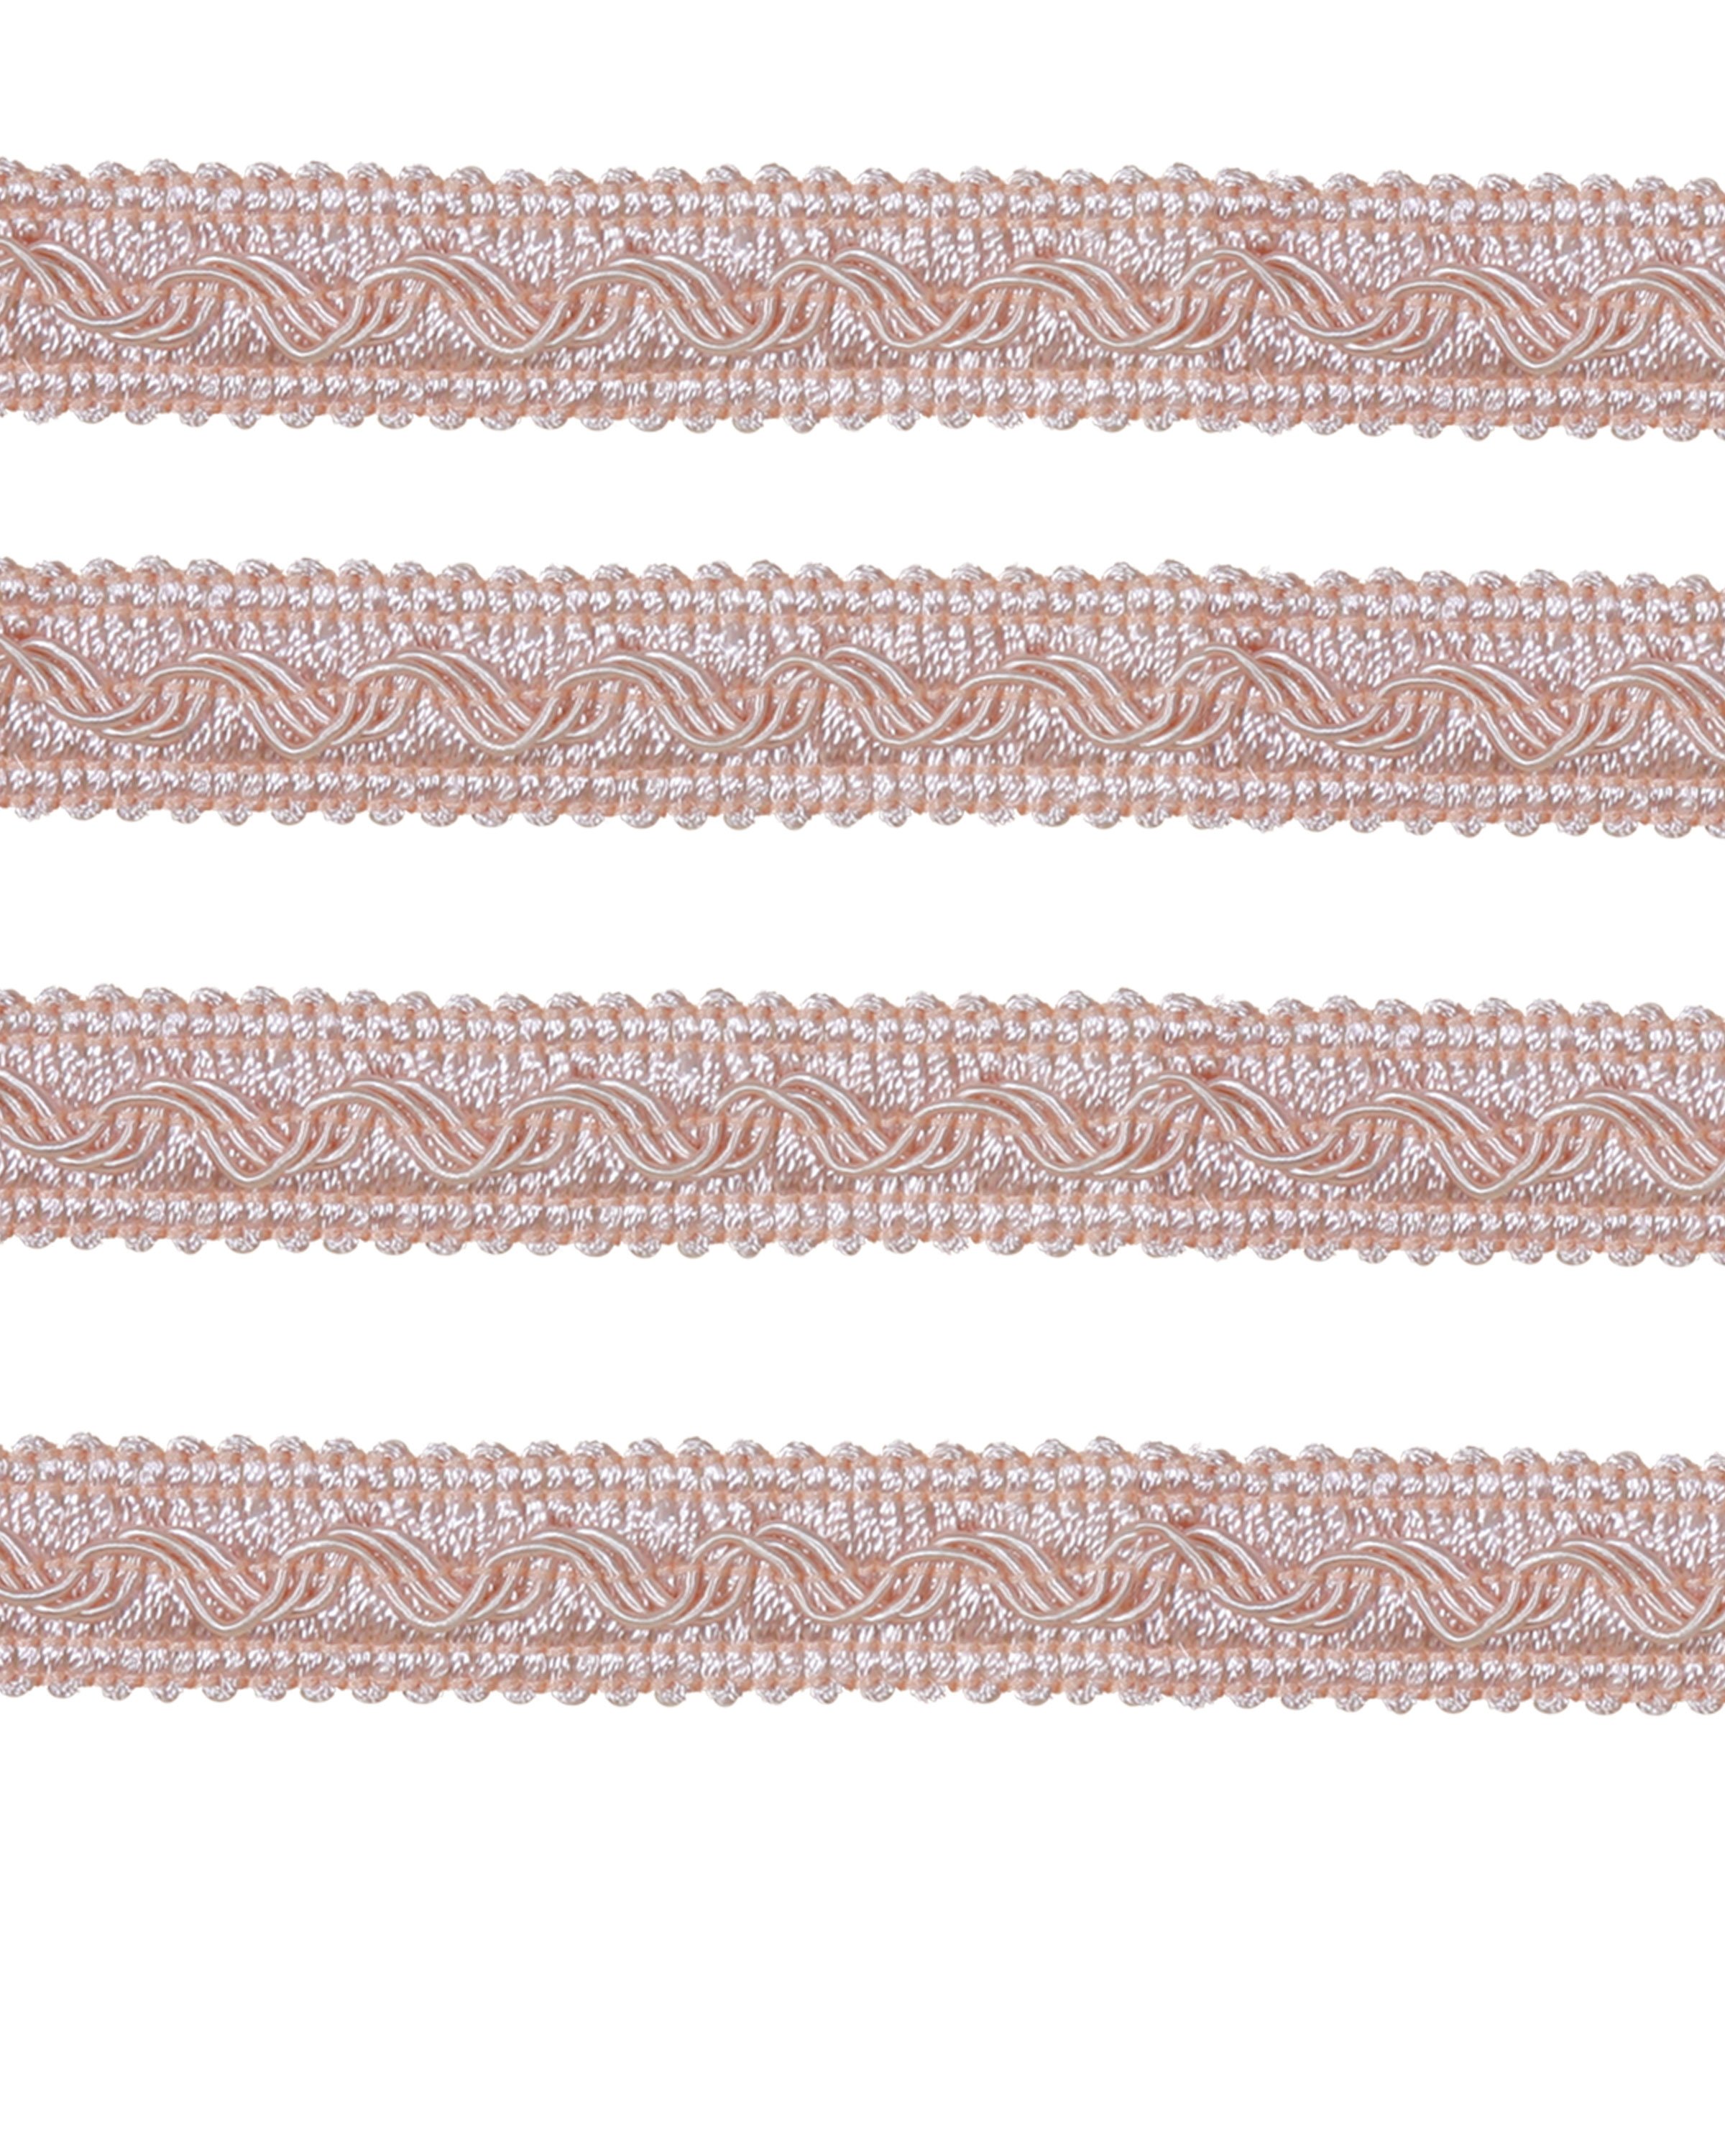 Small Fancy Braid - Pale Pink 17mm Price is for 5 metres